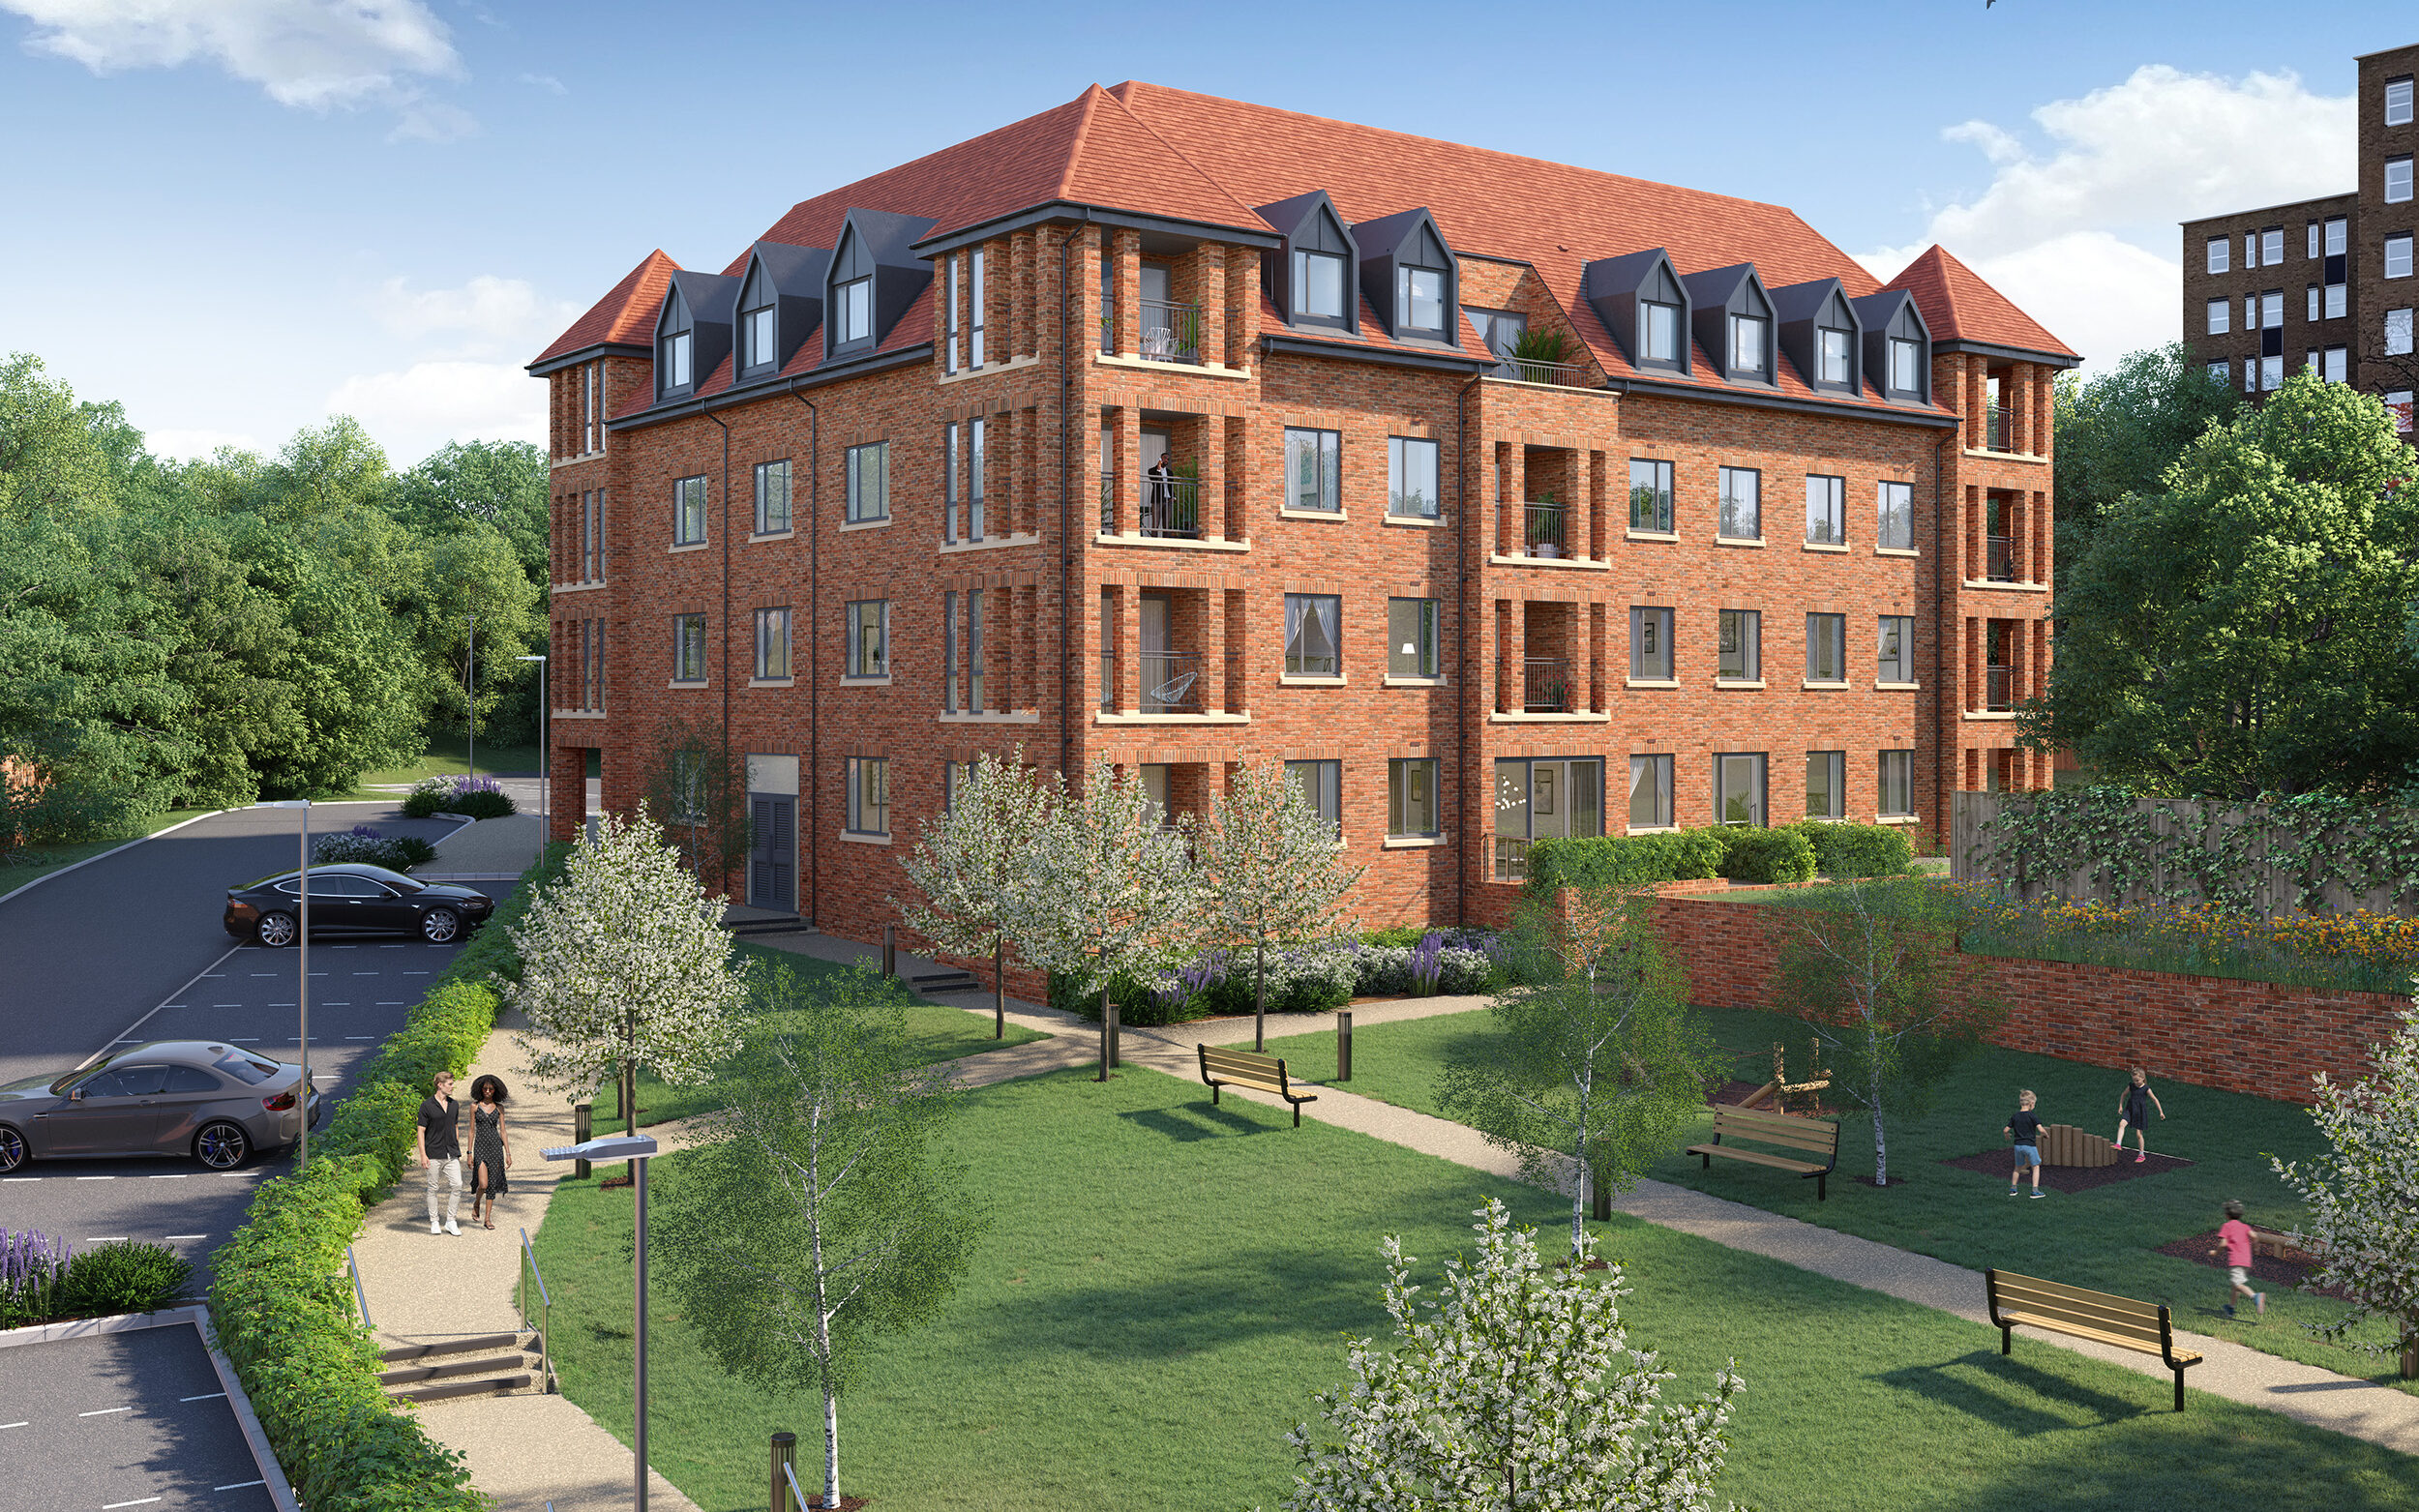 An exterior CGI image of a development from Square Roots - available to purchase through Shared Ownership.